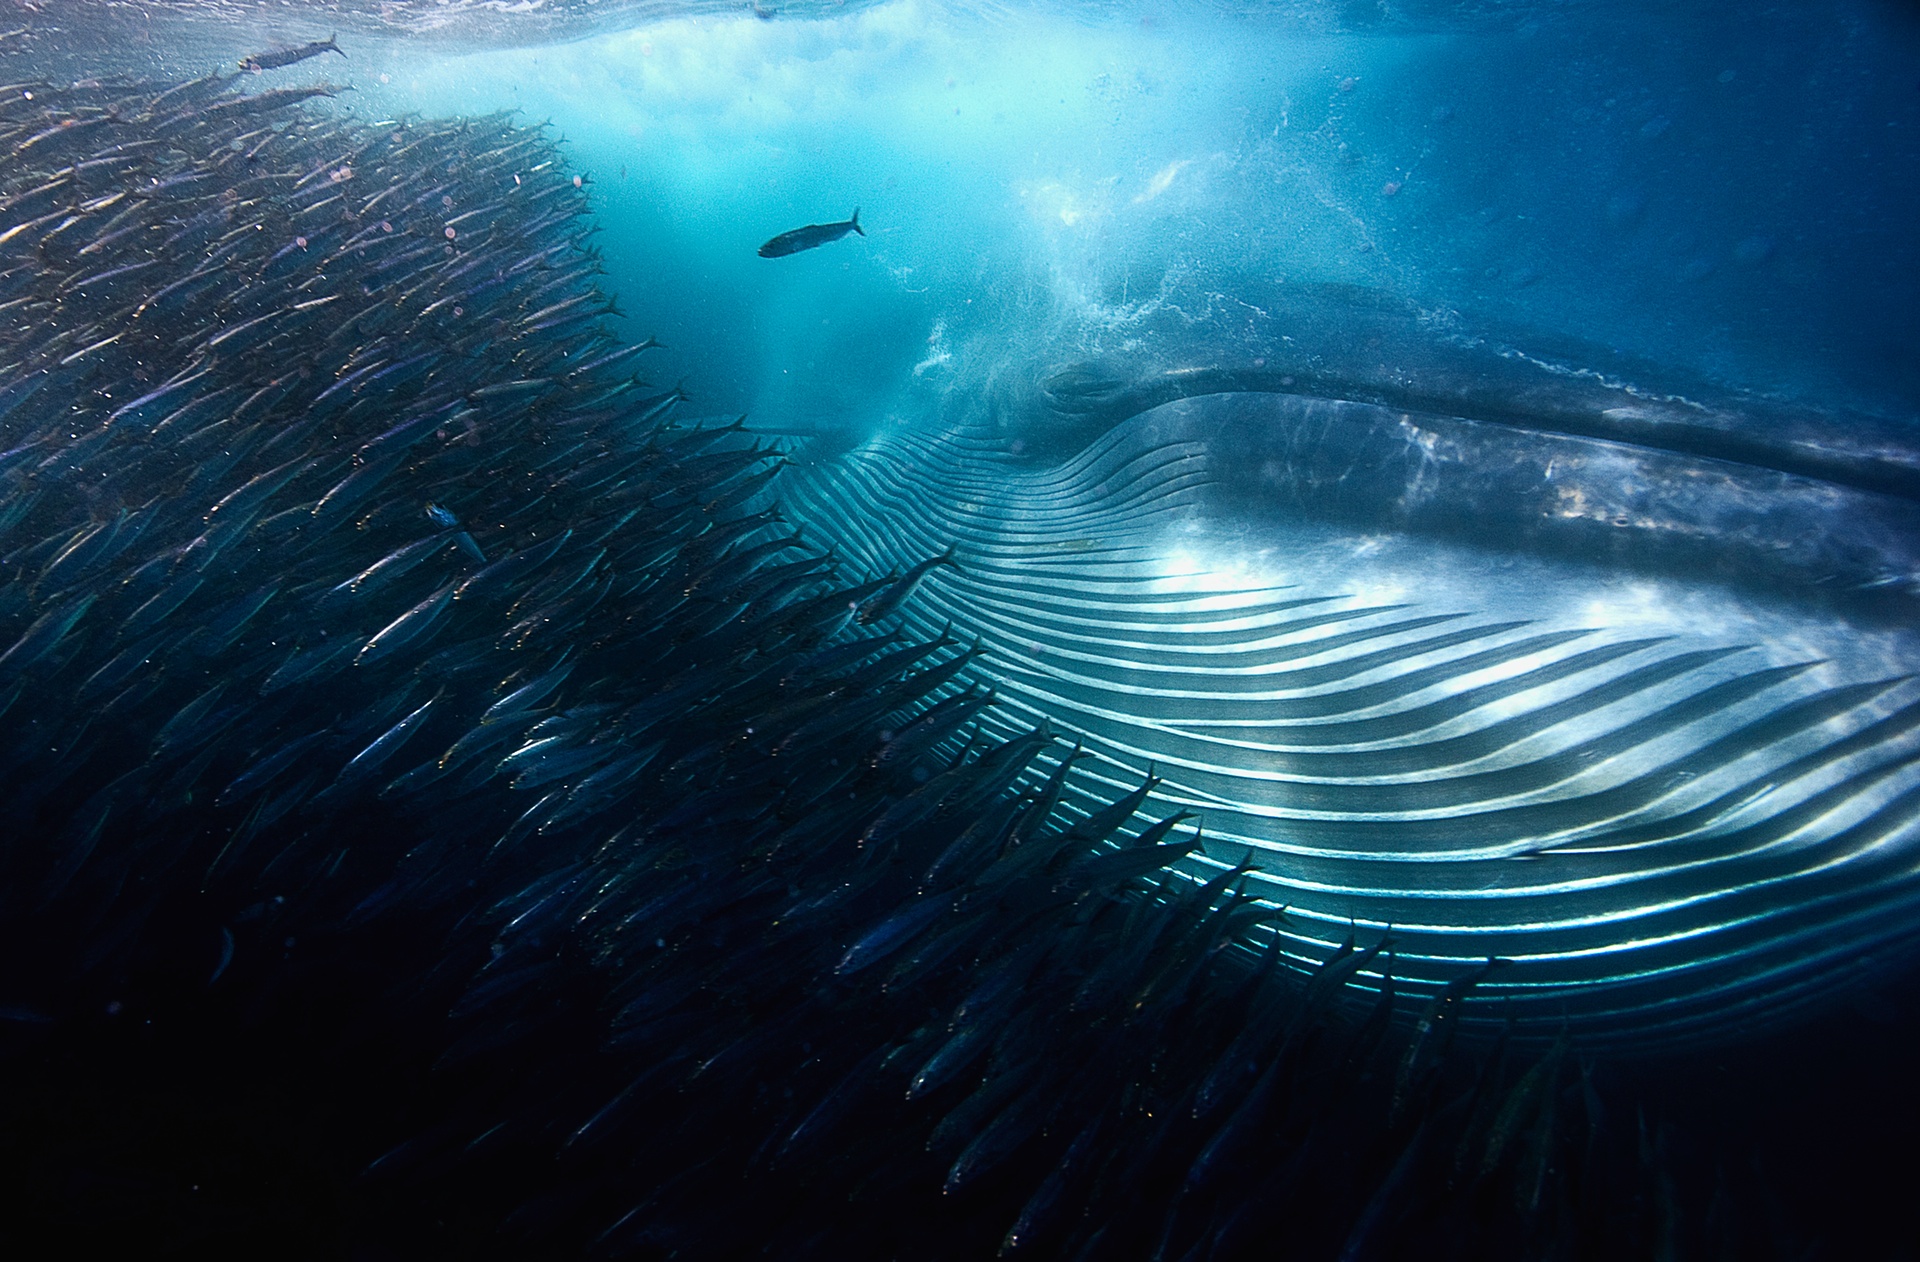  Underwater winner: A whale of a mouthful by Michael AW (Australia).